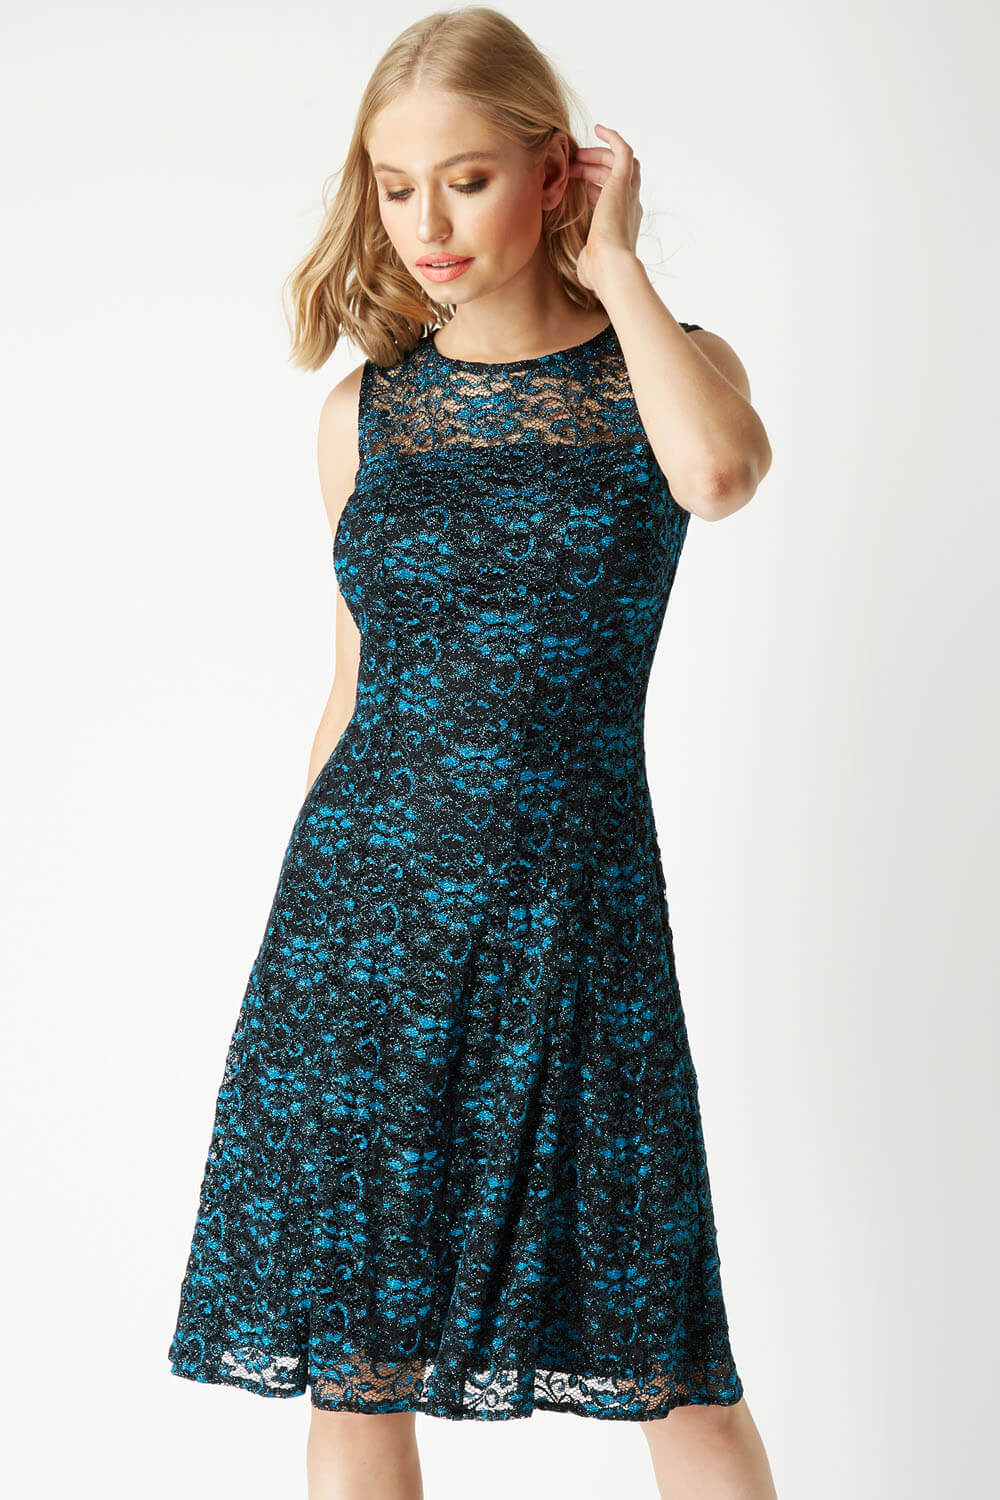 Shimmer Lace Fit and Flare Dress in Teal - Roman Originals UK